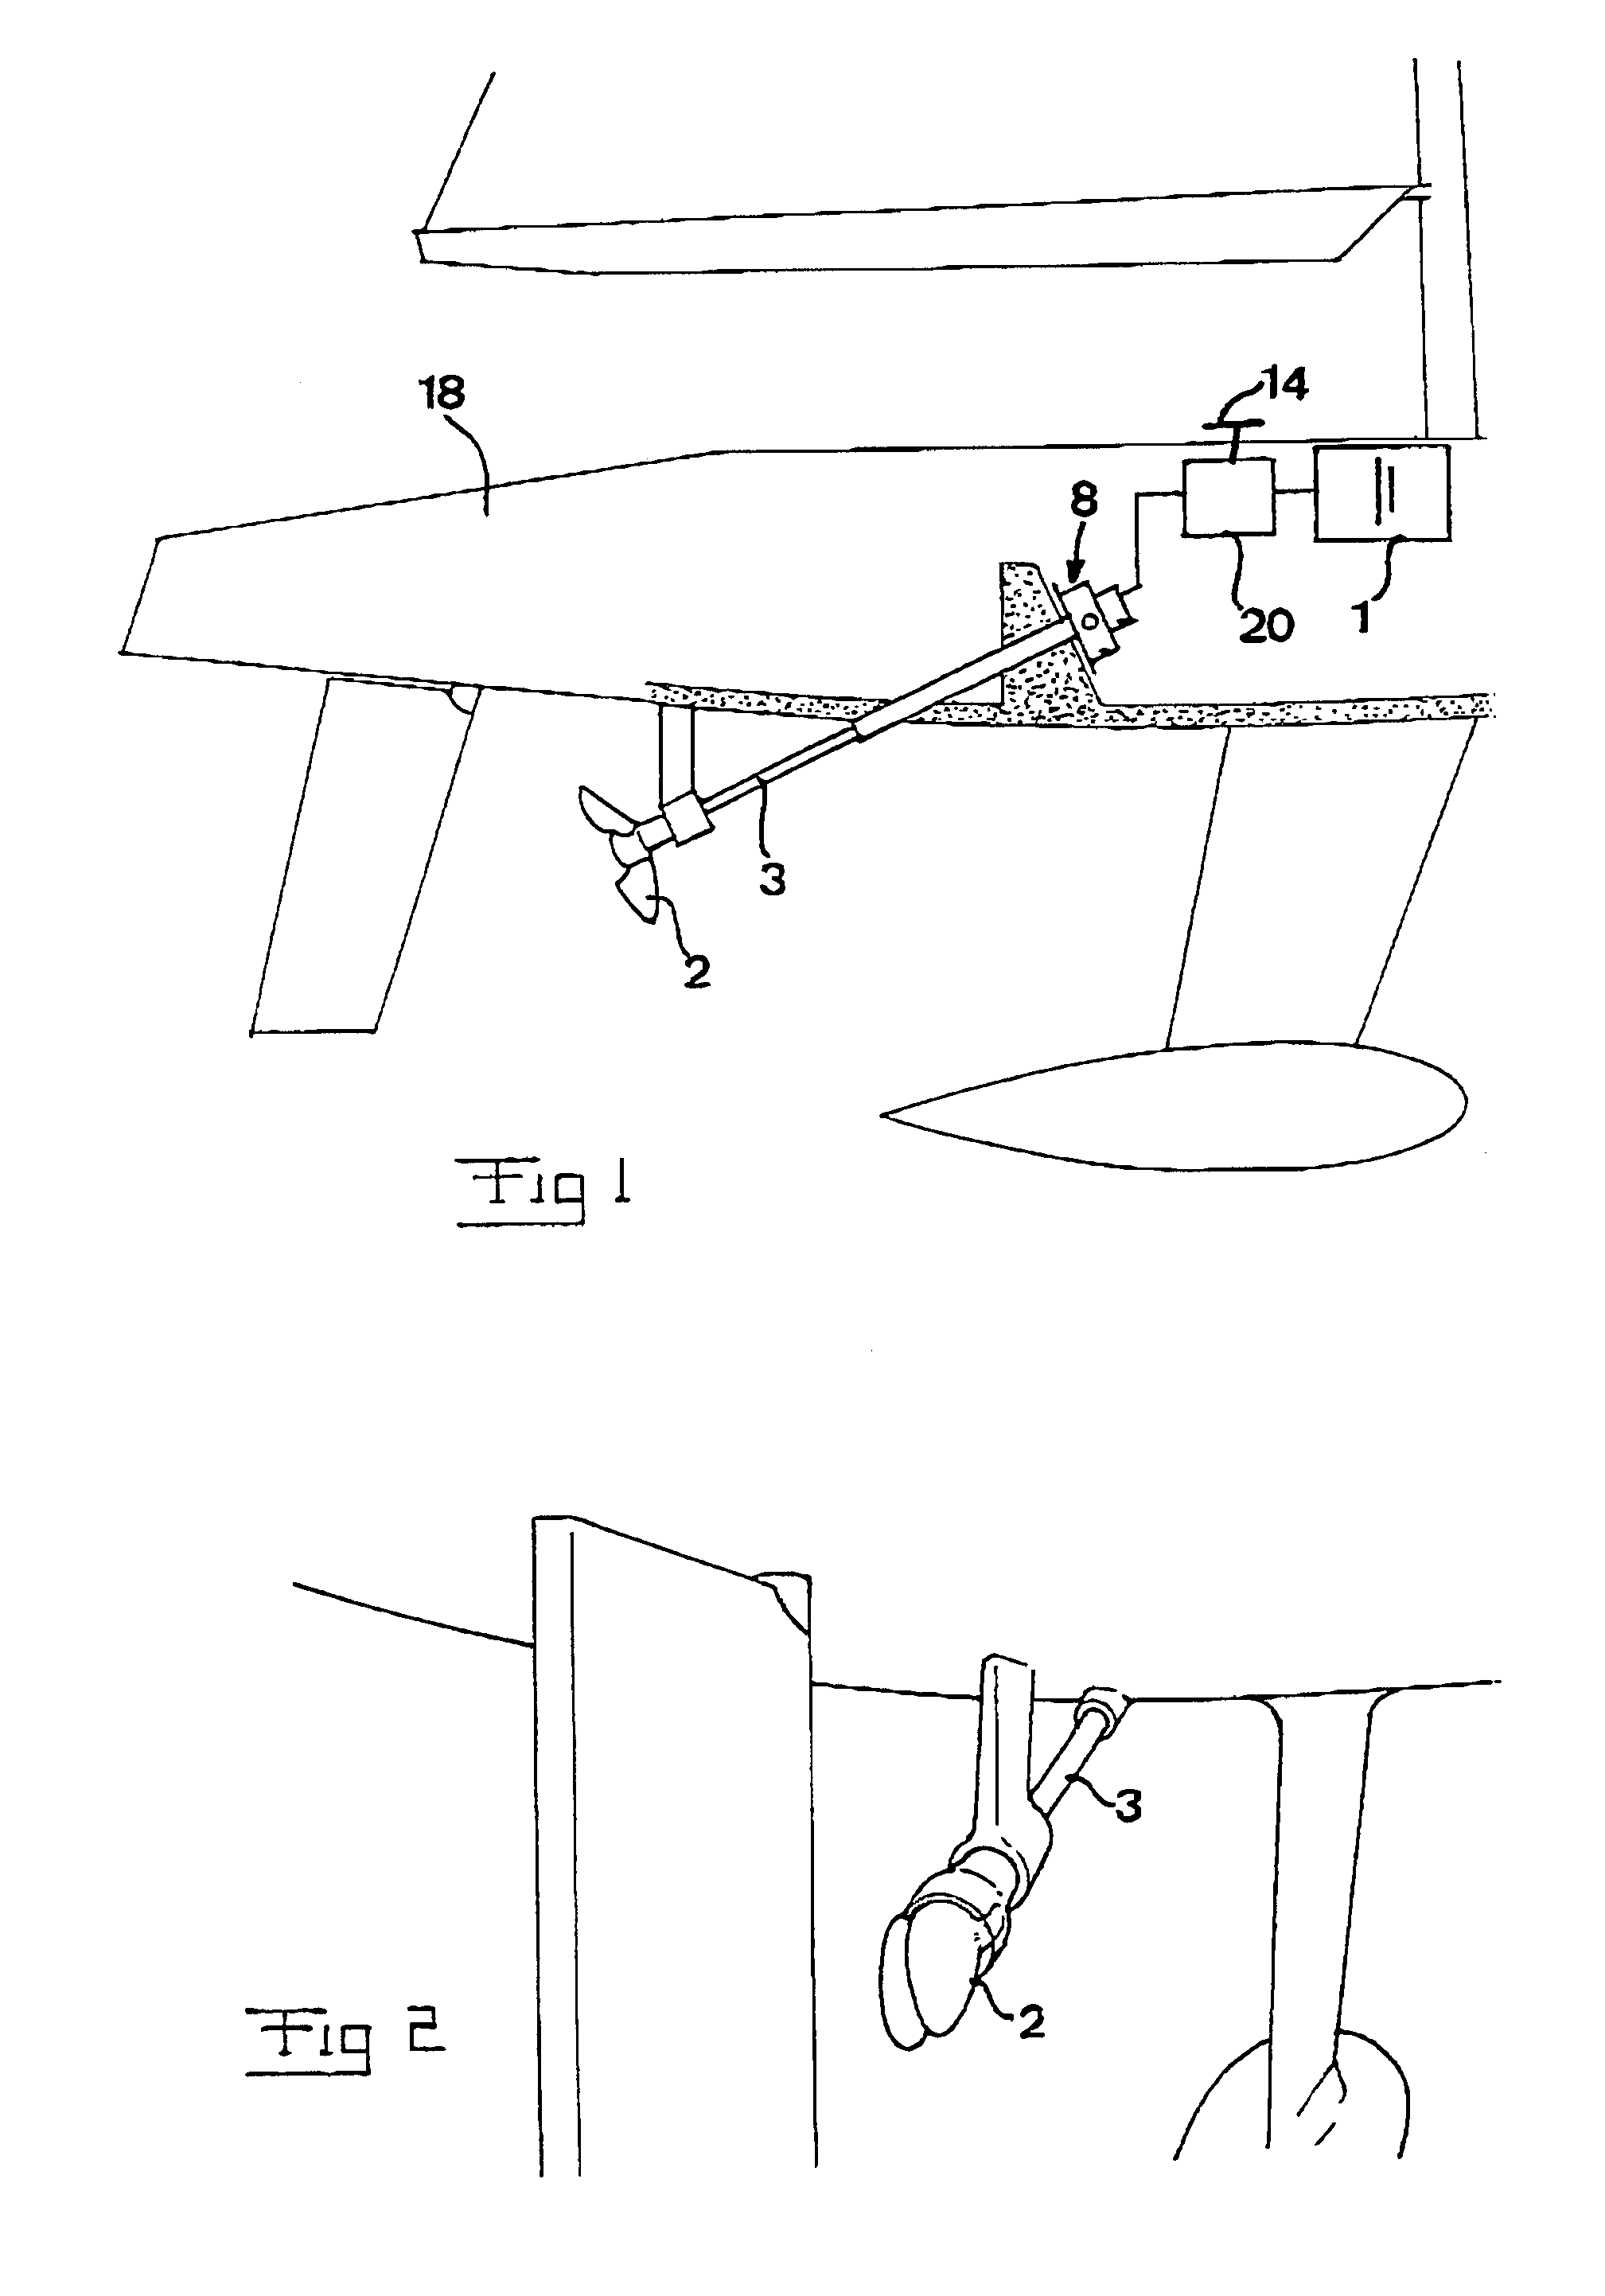 Device for charging at least one electrical battery on board a boat